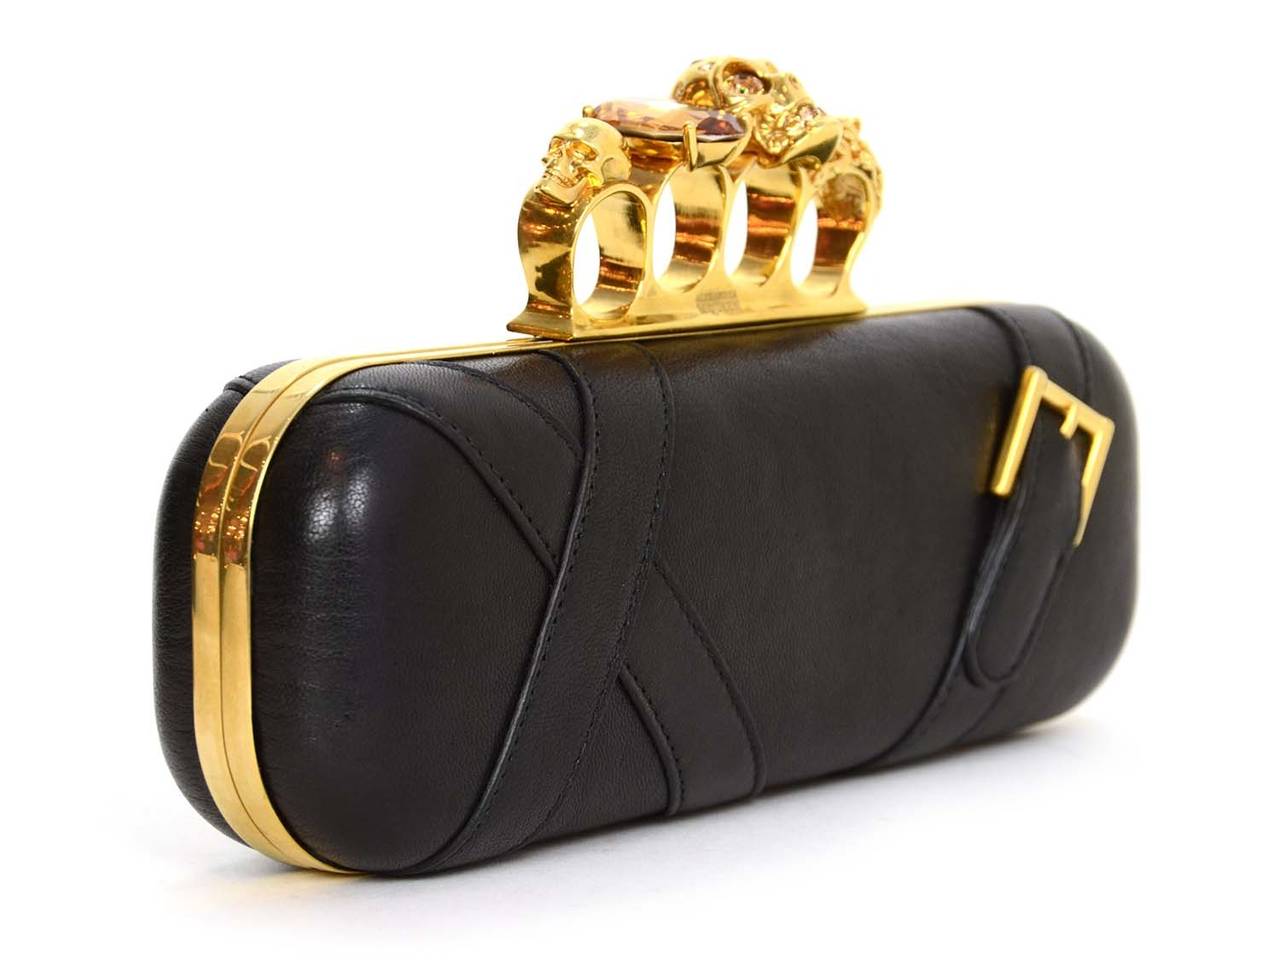 Alexander McQueen Black Leather Knuckle Clutch
Features skull and crystal detailing at knuckle finger holders

    Made in: Italy
    Color: Black and gold
    Hardware: Goldtone
    Materials: Leather and metal
    Lining: Black leather
   